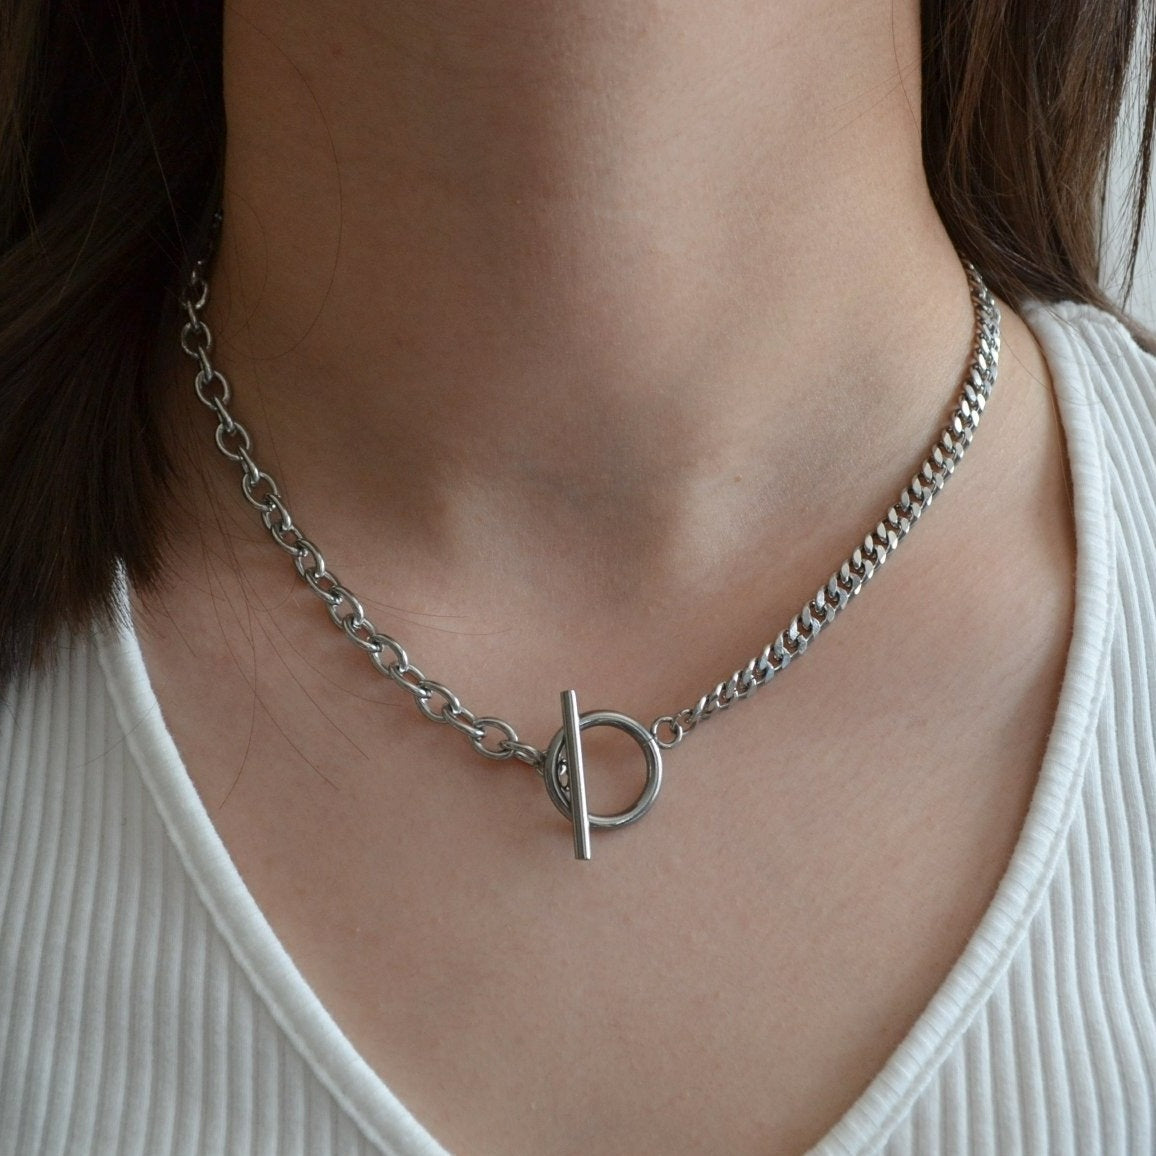 Chunky Silver Double Chain Toggle Necklace For Women or Men